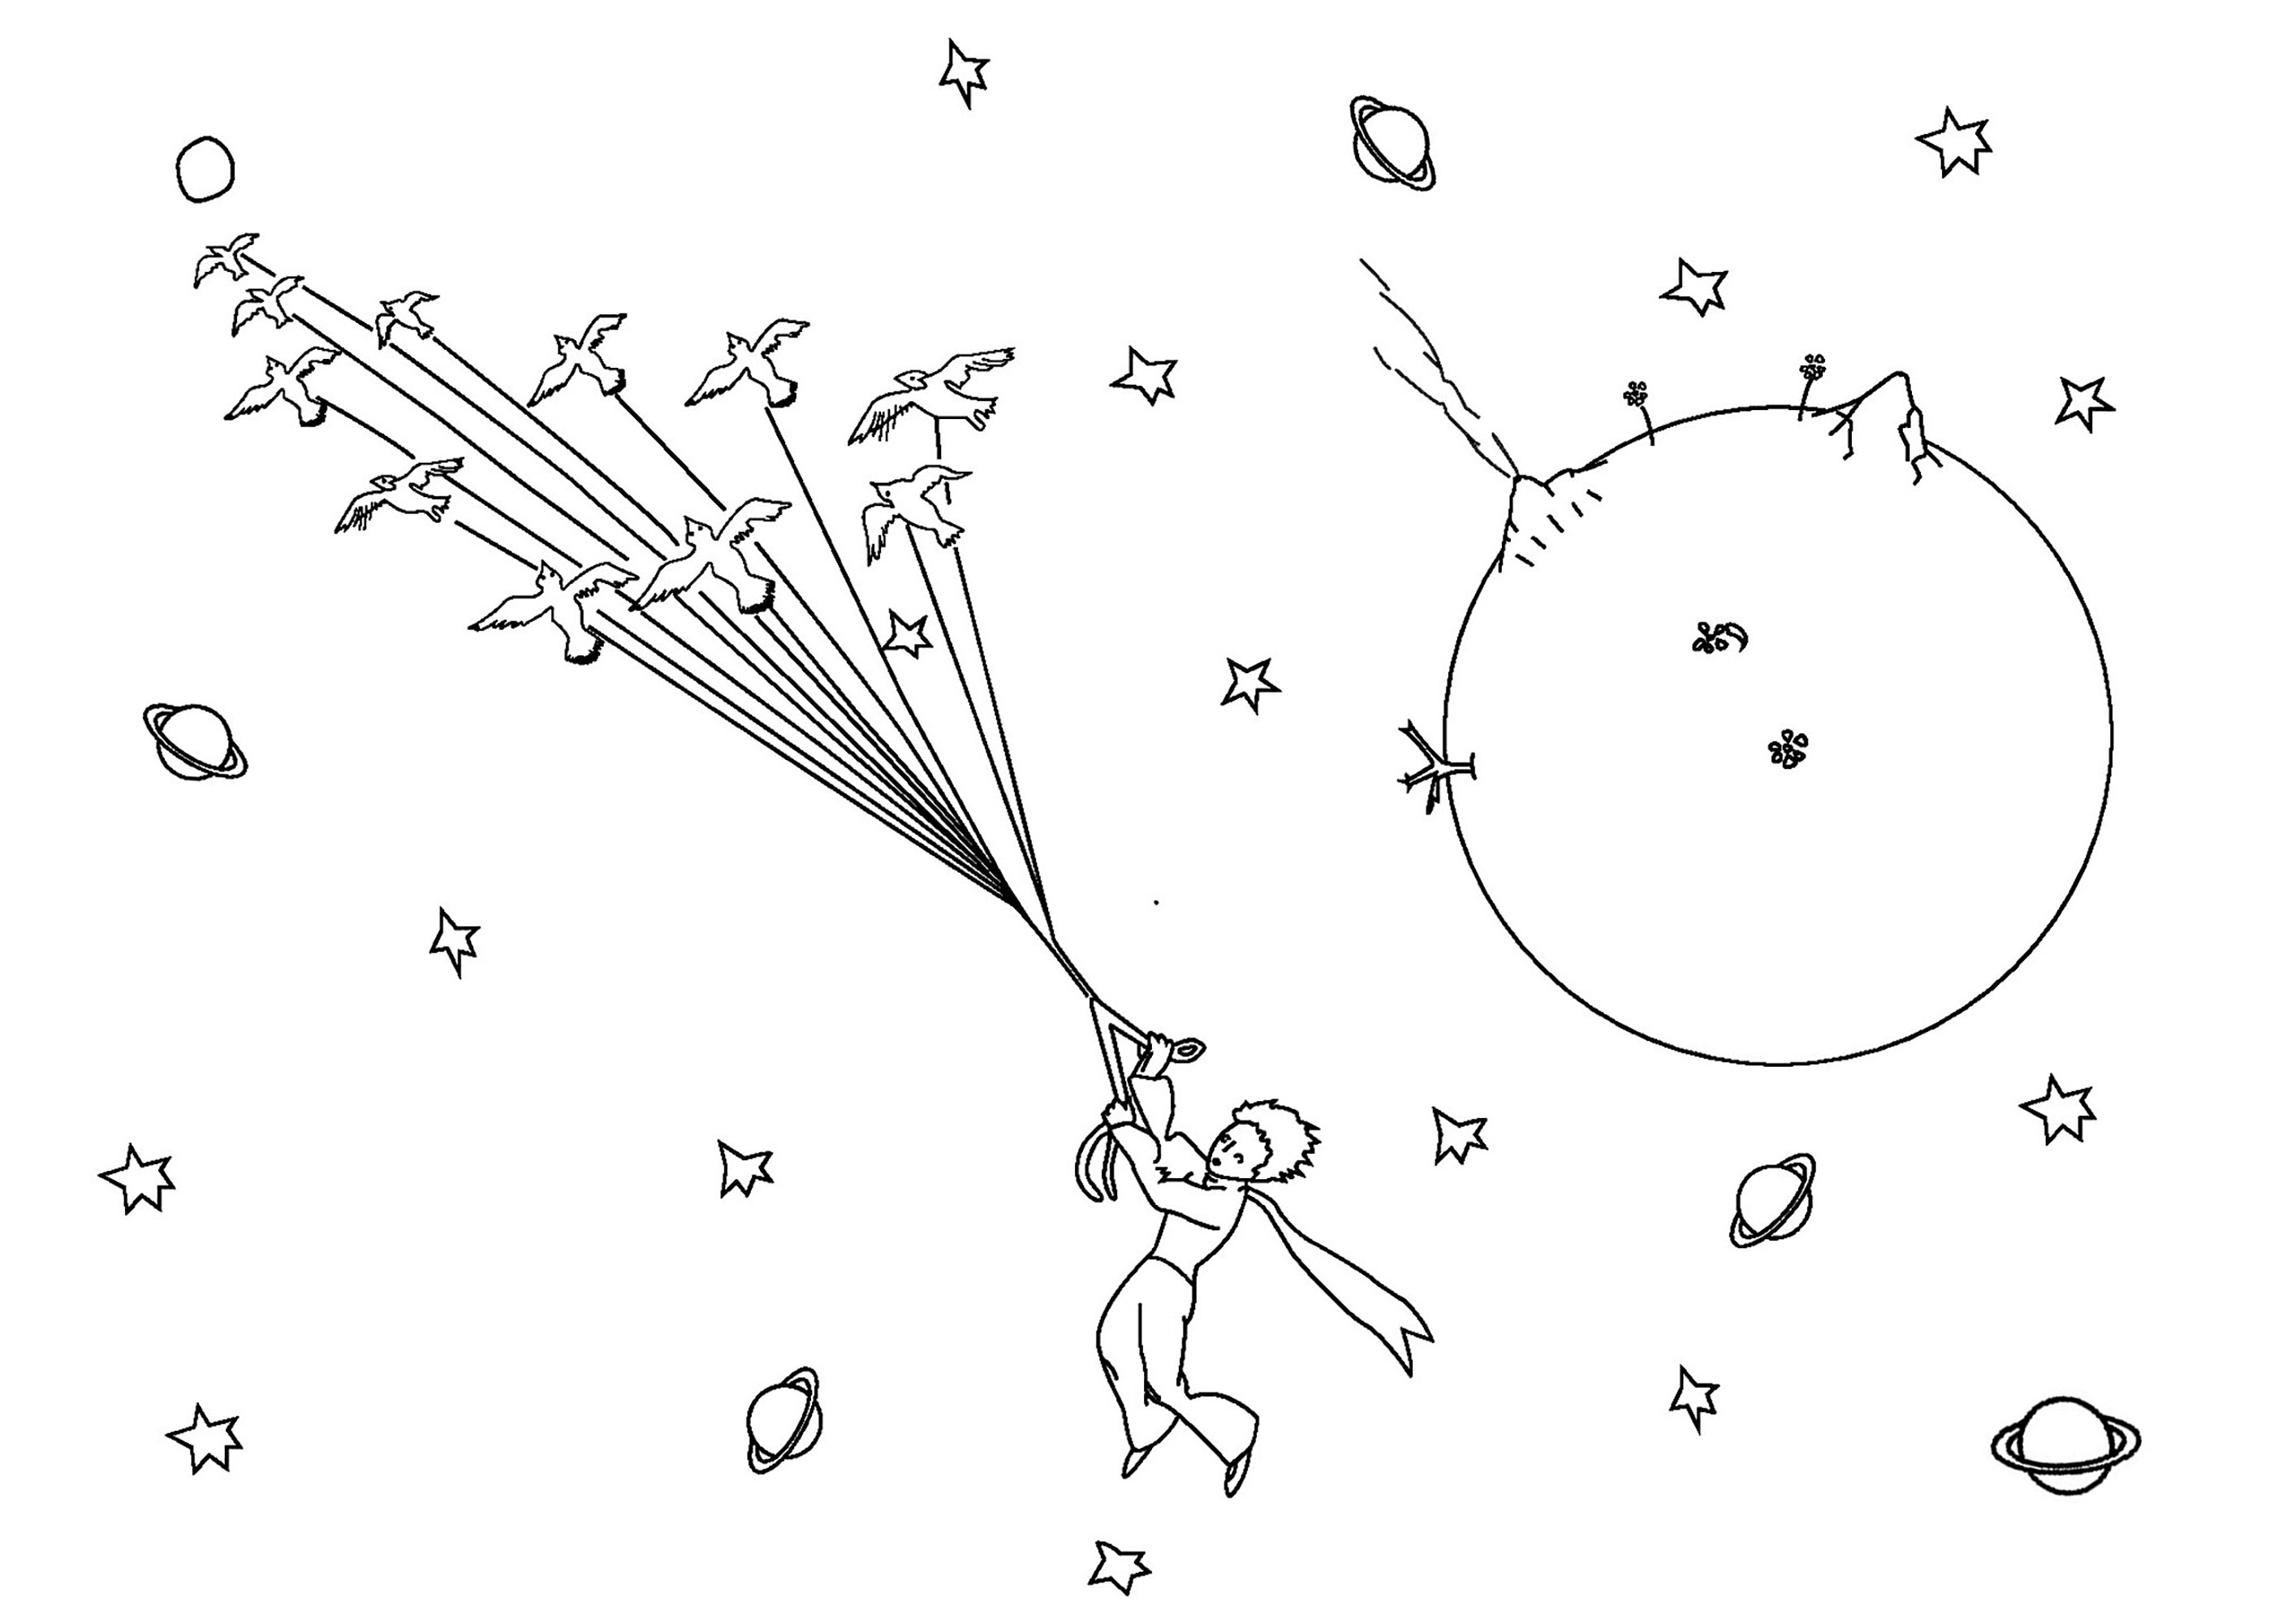 The Little Prince takes off and sails into space next to a planet.  and in the middle of stars and other distant planets